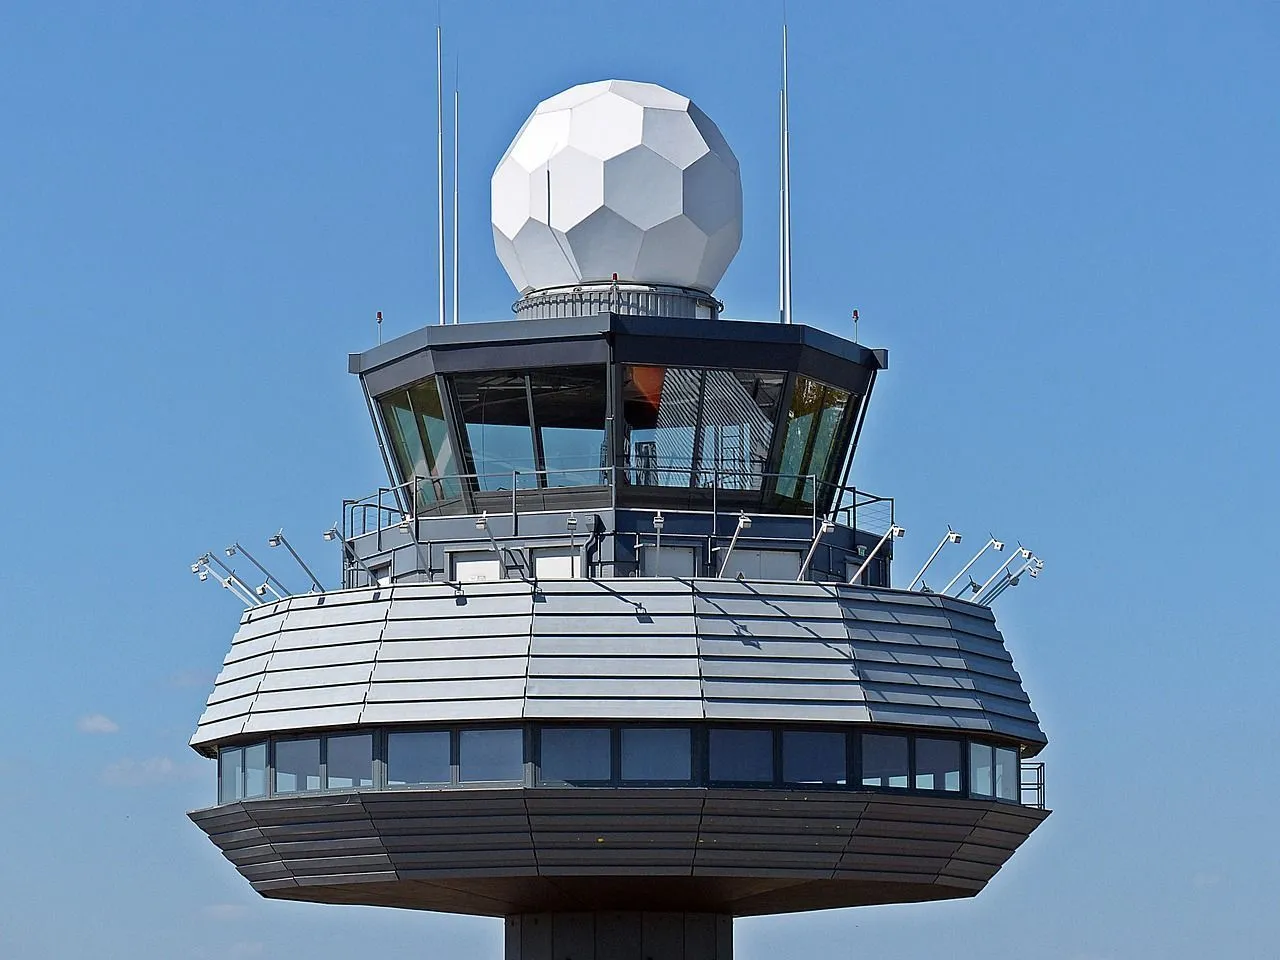 Air traffic controllers often enjoy 13-26 days for vacations and travel annually.